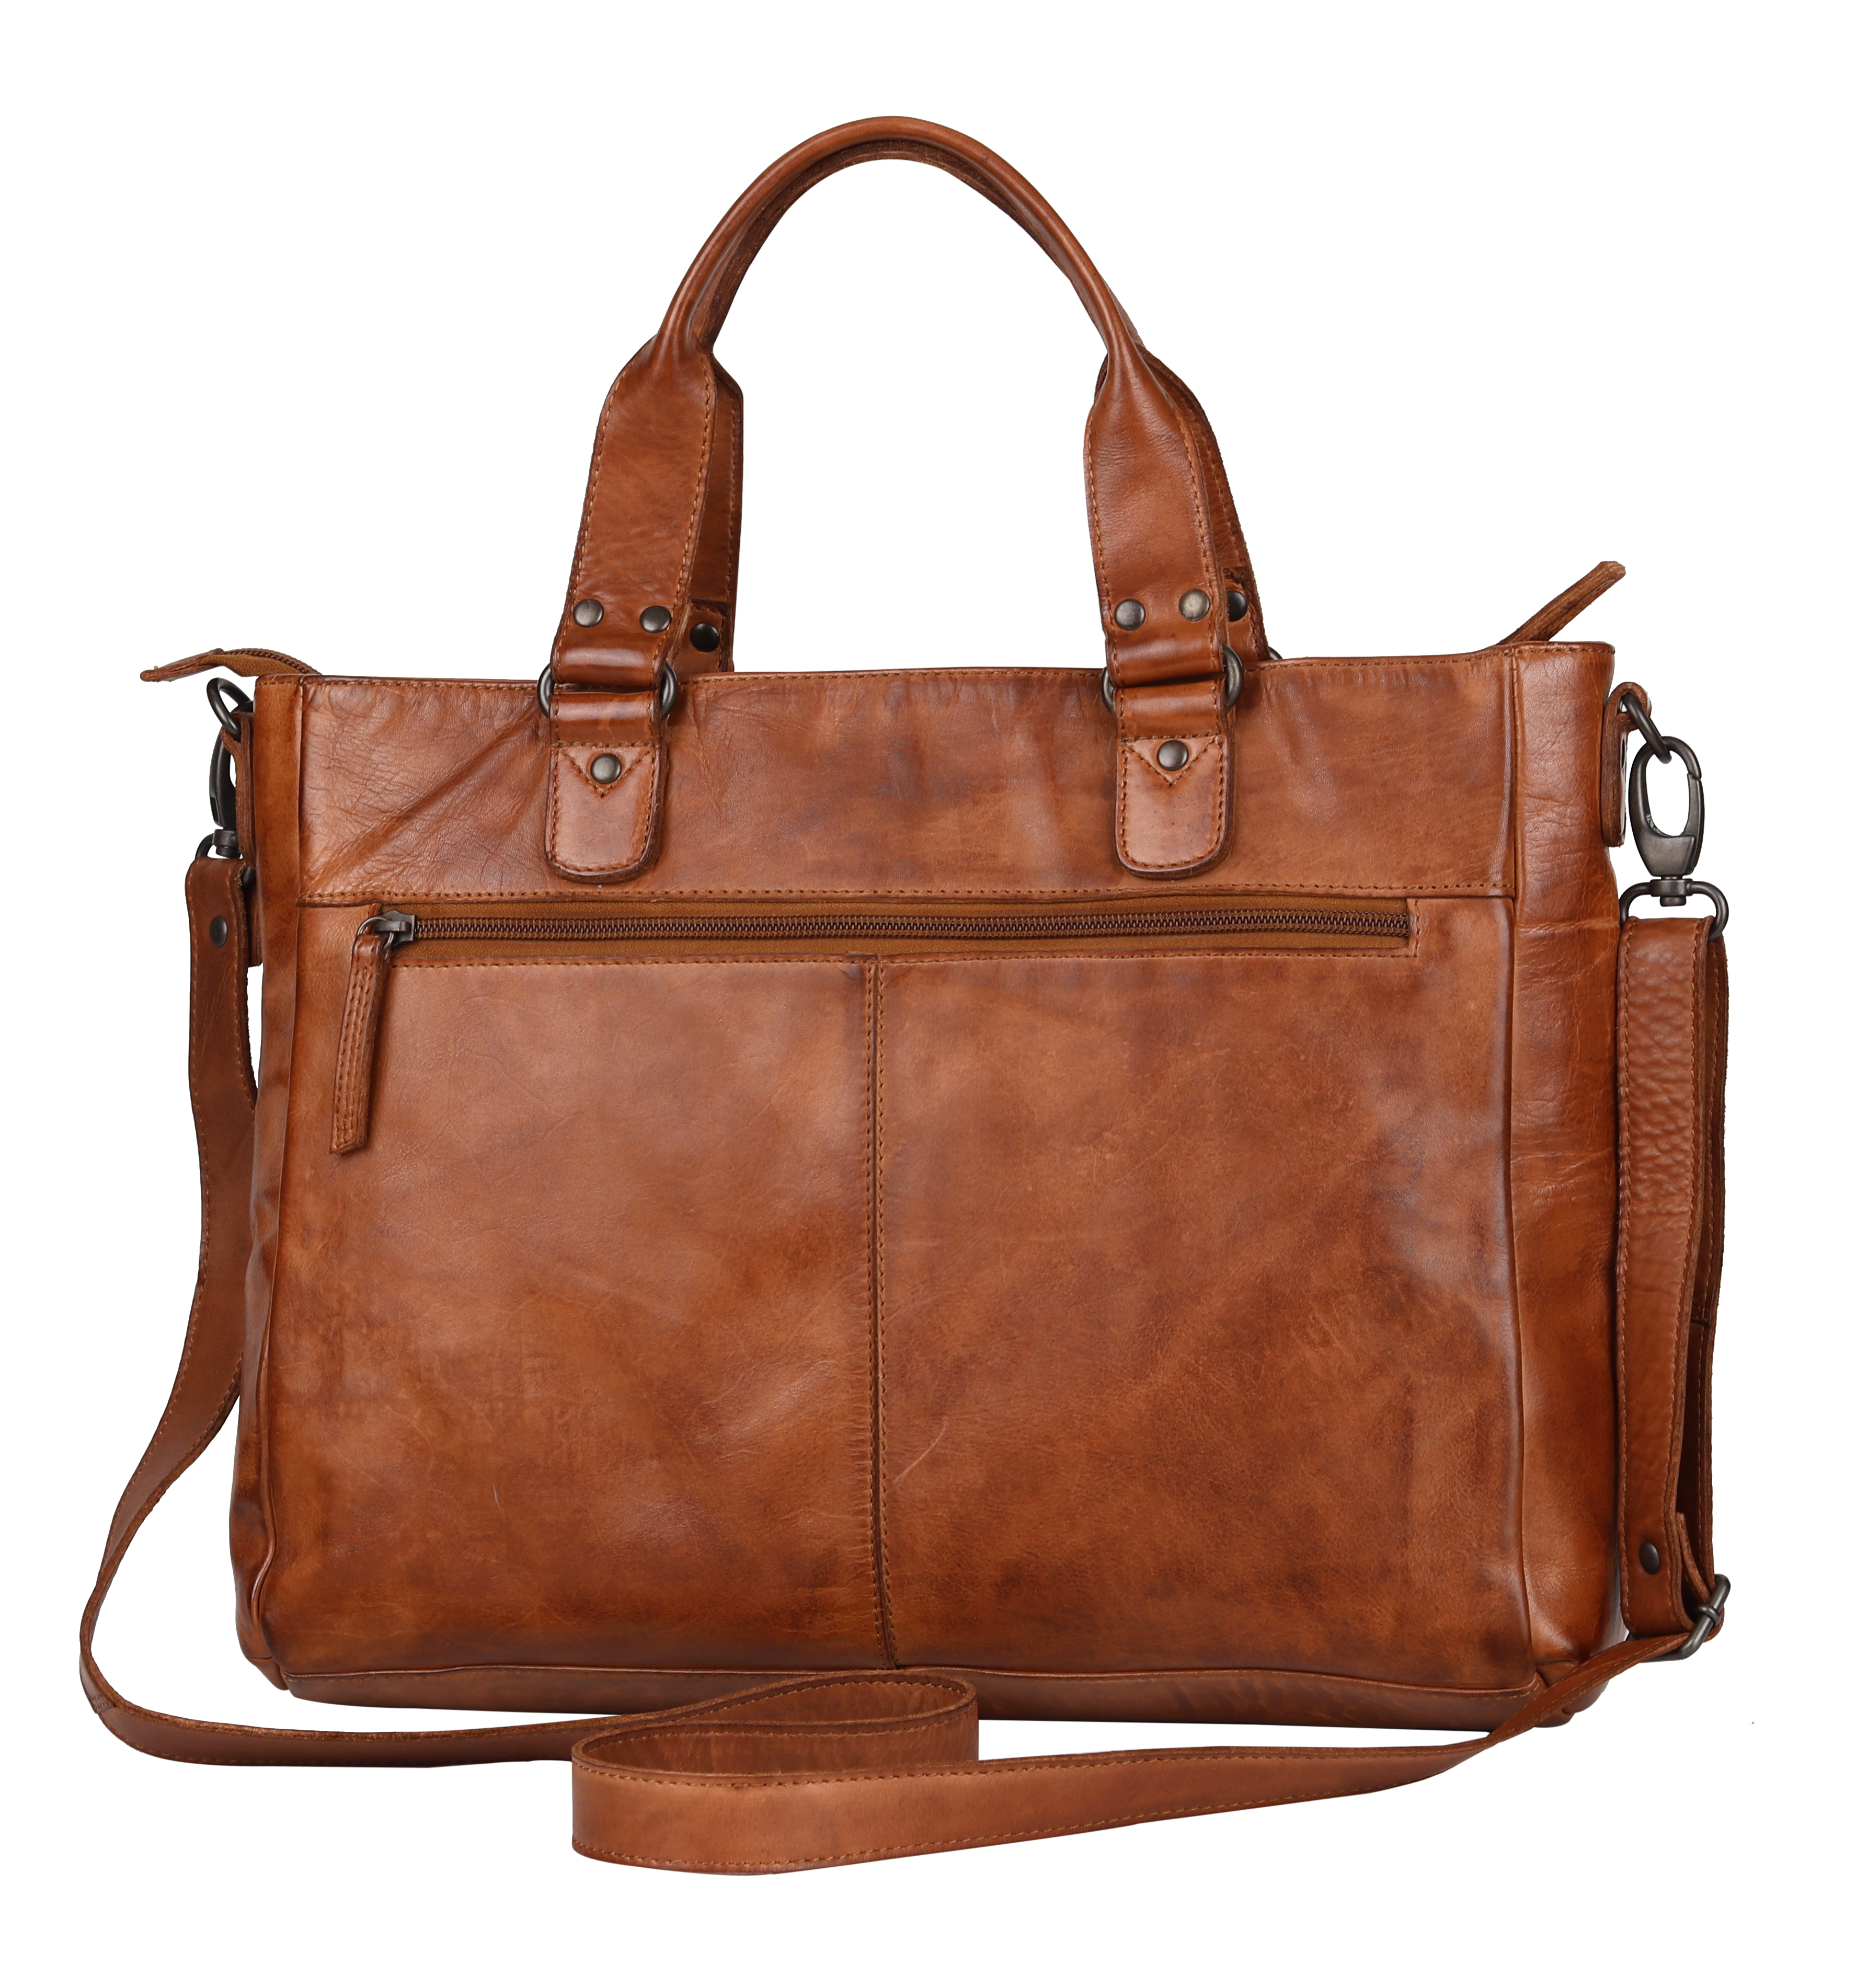 BOL/Open Road Two Handled Messenger Leather Laptop Bag